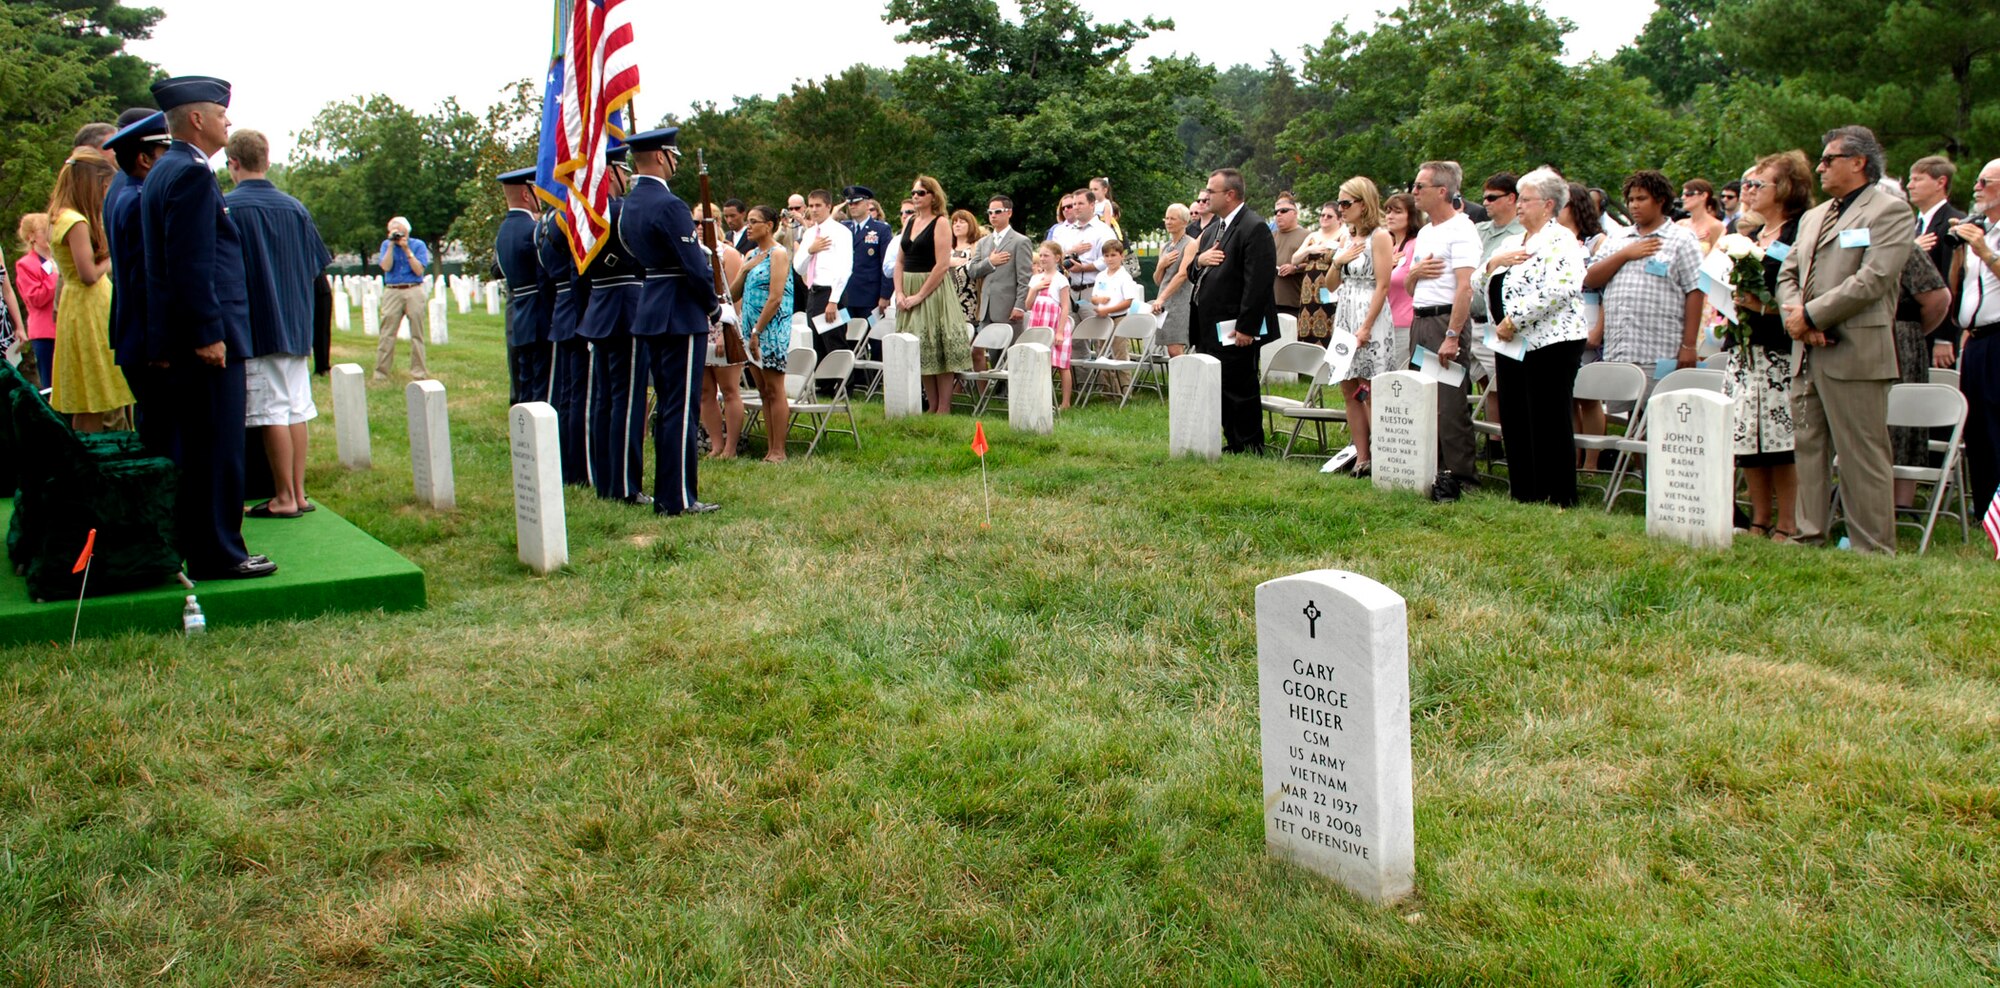 Guests recite the Pledge of Allegiance during a remembrance ceremony, June 25, 2011, at Arlington National Cemetery, Va., to mark the 15th anniversary since the Khobar Towers bombing. Nineteen Airmen were killed in the terrorist bombing, June 25, 1996, at Dhahran Air Base, Saudi Arabia. (U.S. Air Force photo/Staff Sgt. Tiffany Trojca)